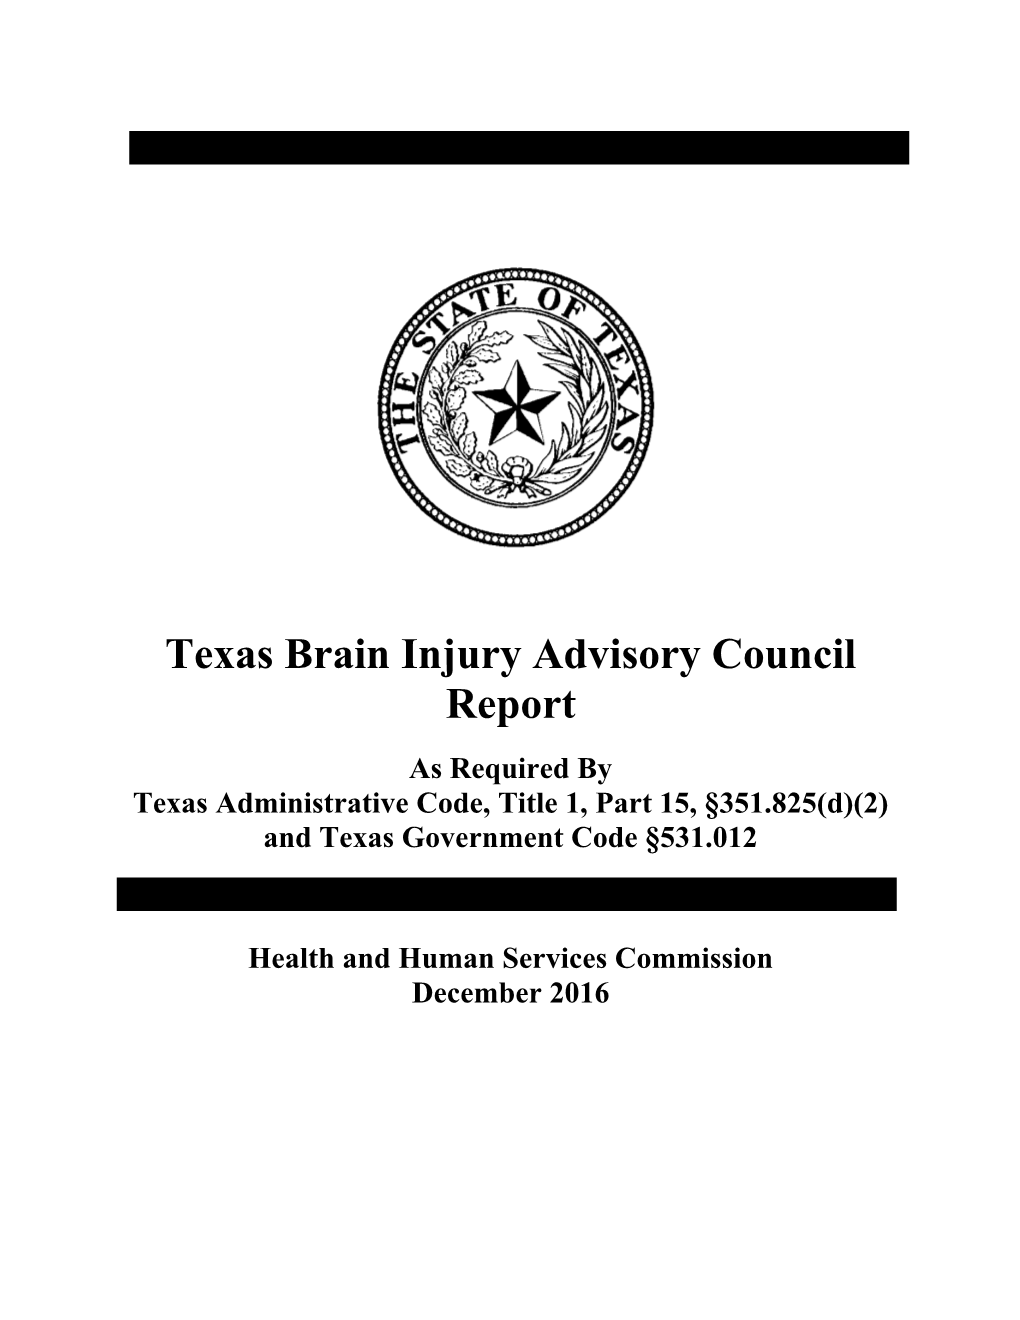 Texas Brain Injury Advisory Council Report As Required by Texas Administrative Code, Title 1, Part 15, §351.825(D)(2) and Texas Government Code §531.012